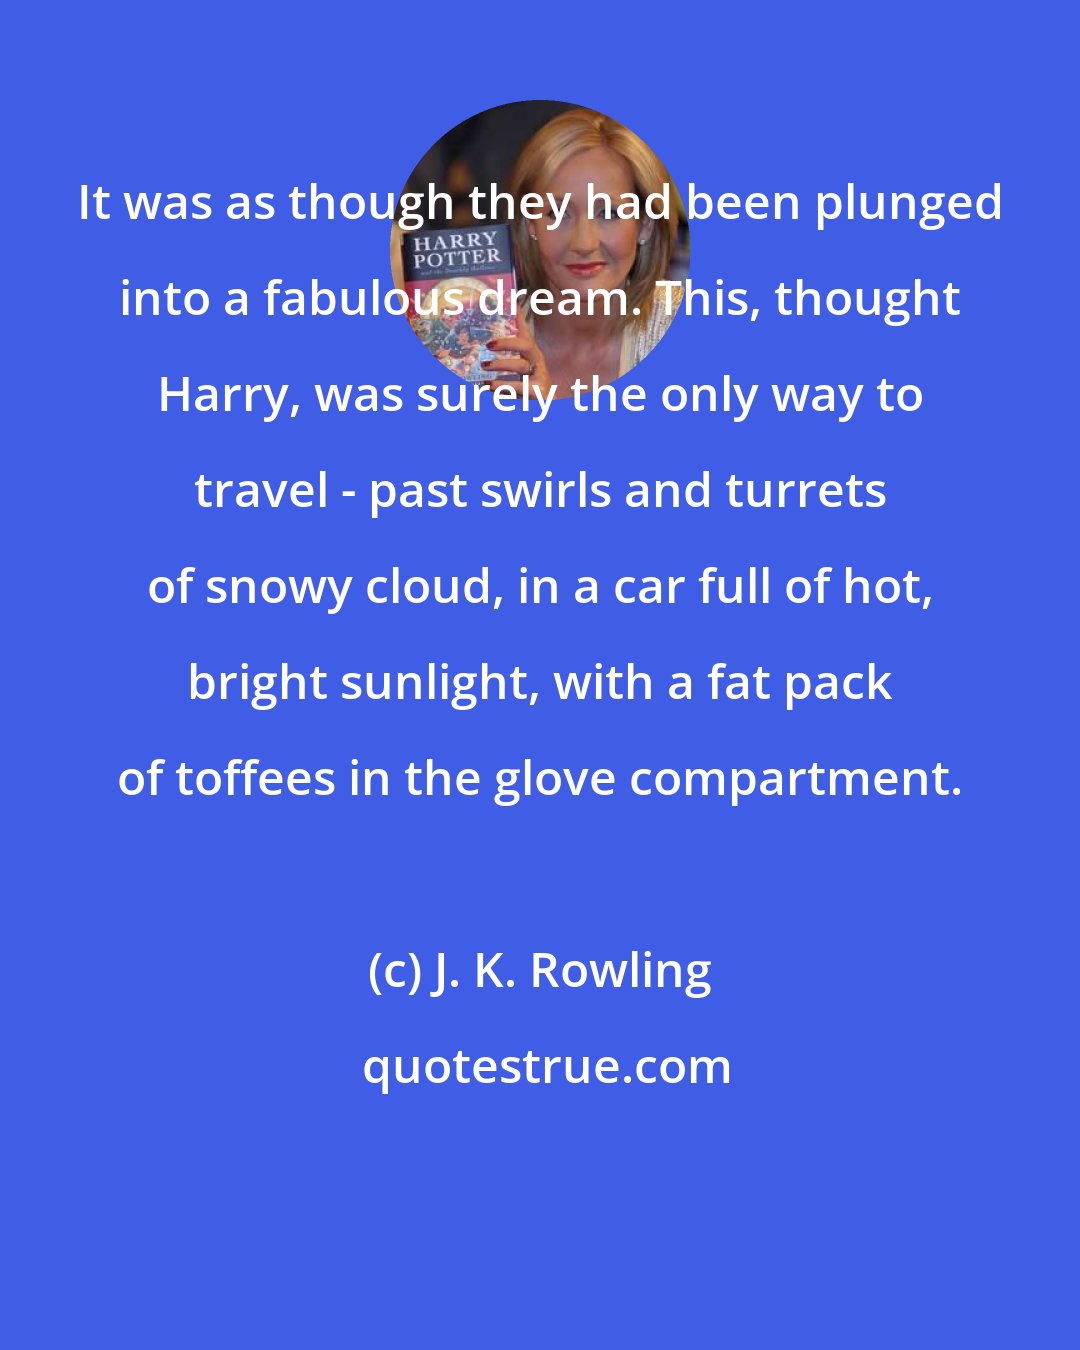 J. K. Rowling: It was as though they had been plunged into a fabulous dream. This, thought Harry, was surely the only way to travel - past swirls and turrets of snowy cloud, in a car full of hot, bright sunlight, with a fat pack of toffees in the glove compartment.